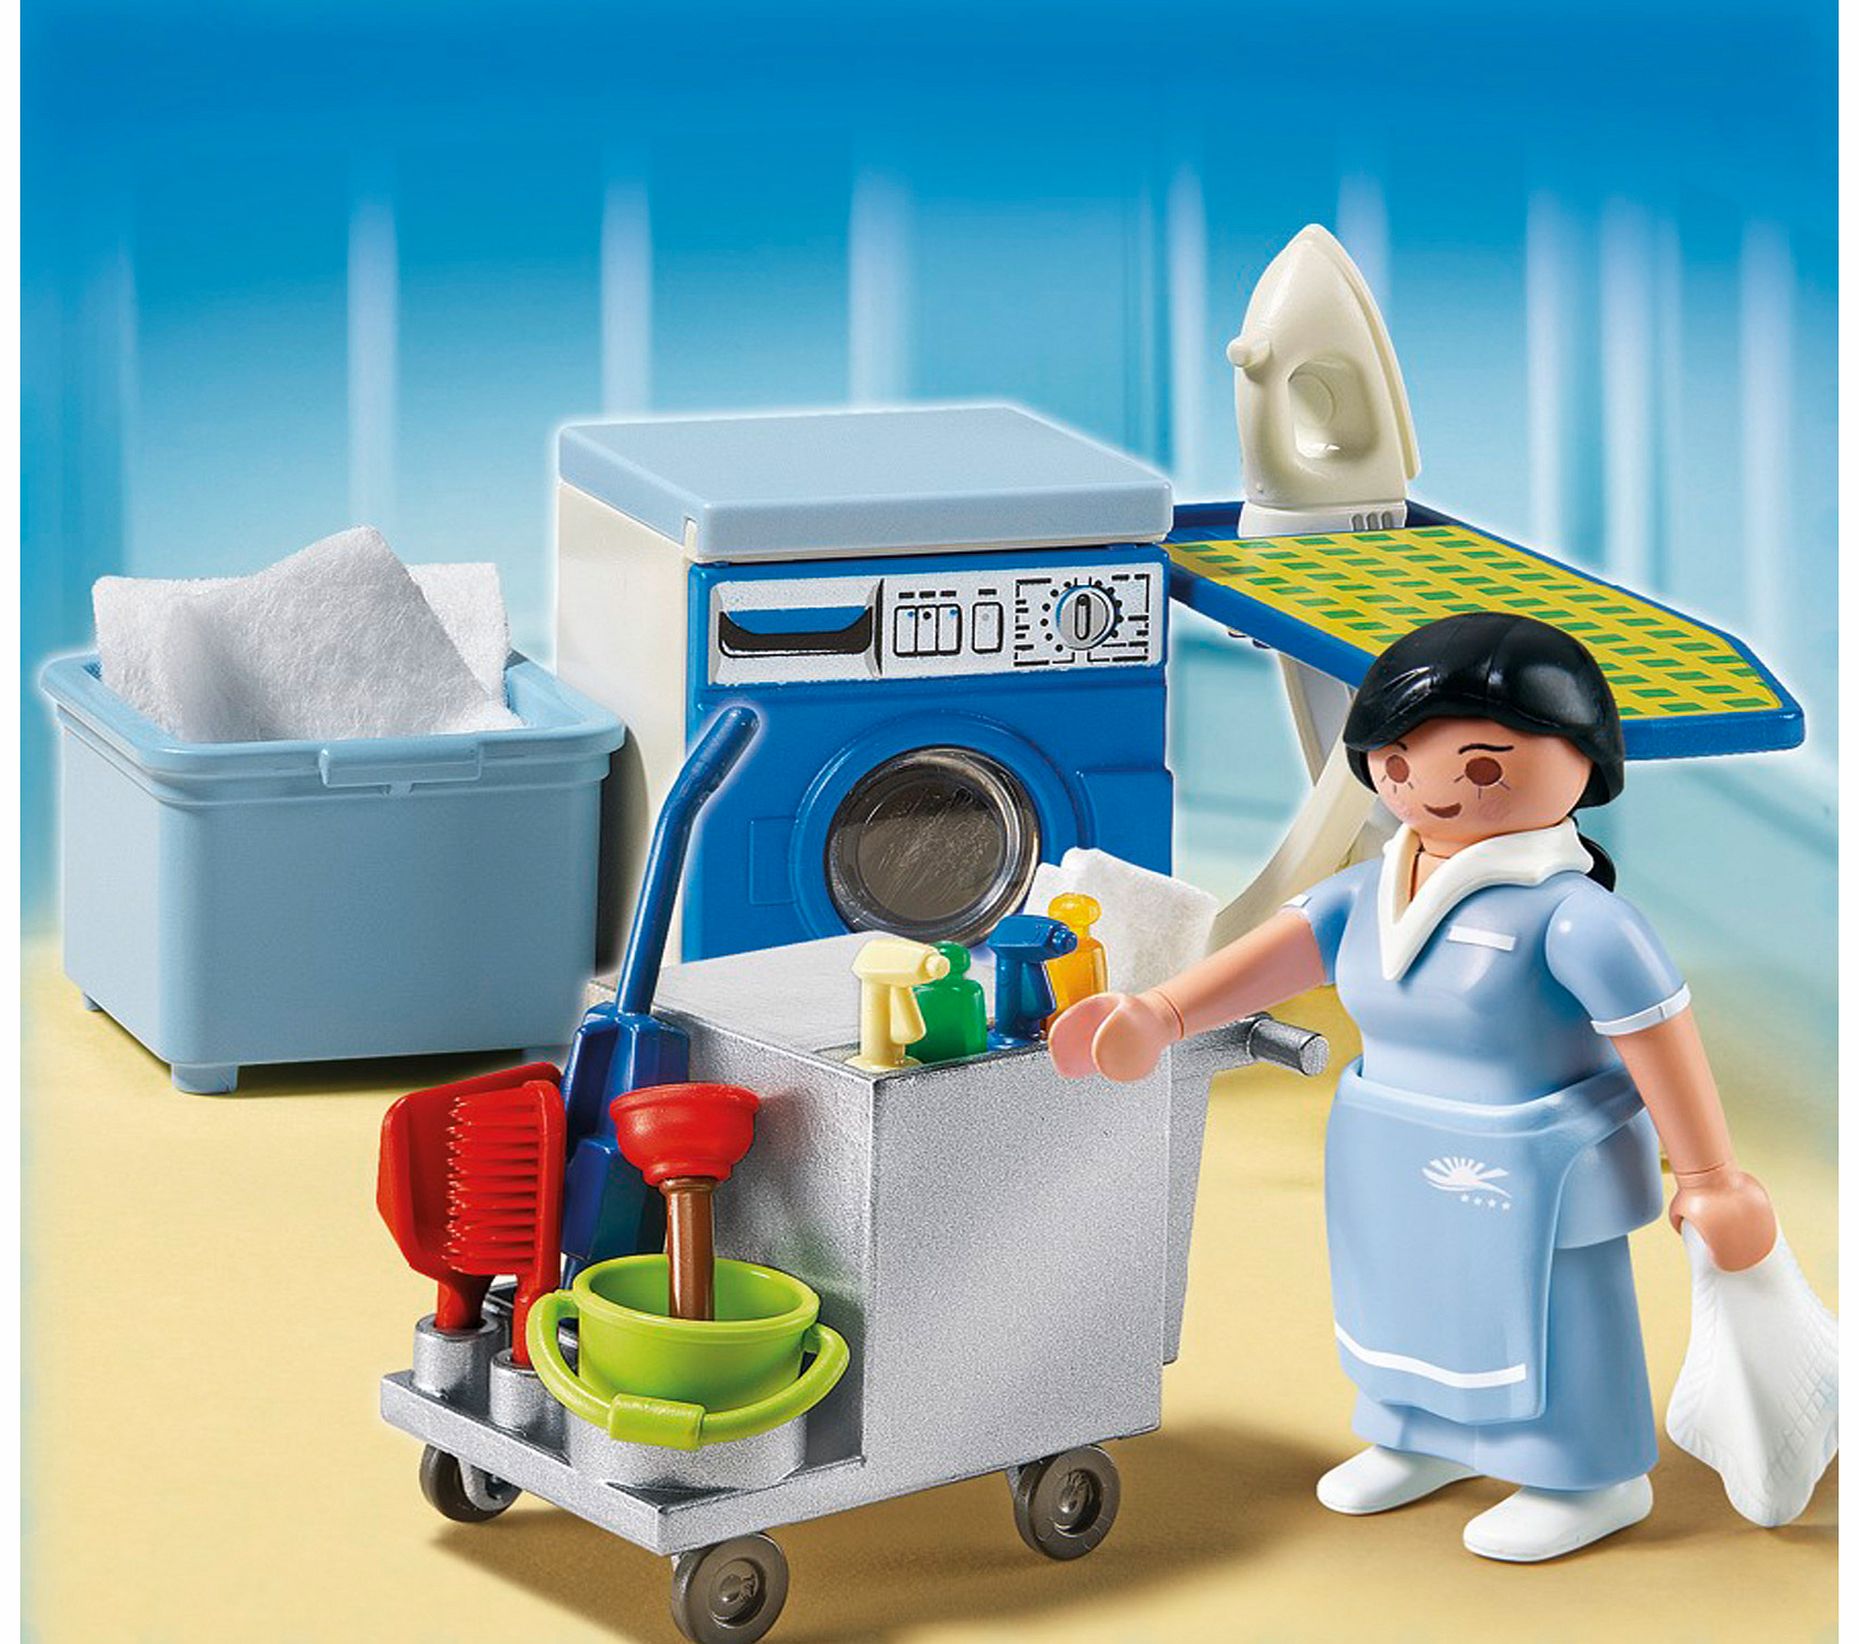 PLAYMOBIL Roomservice 5271